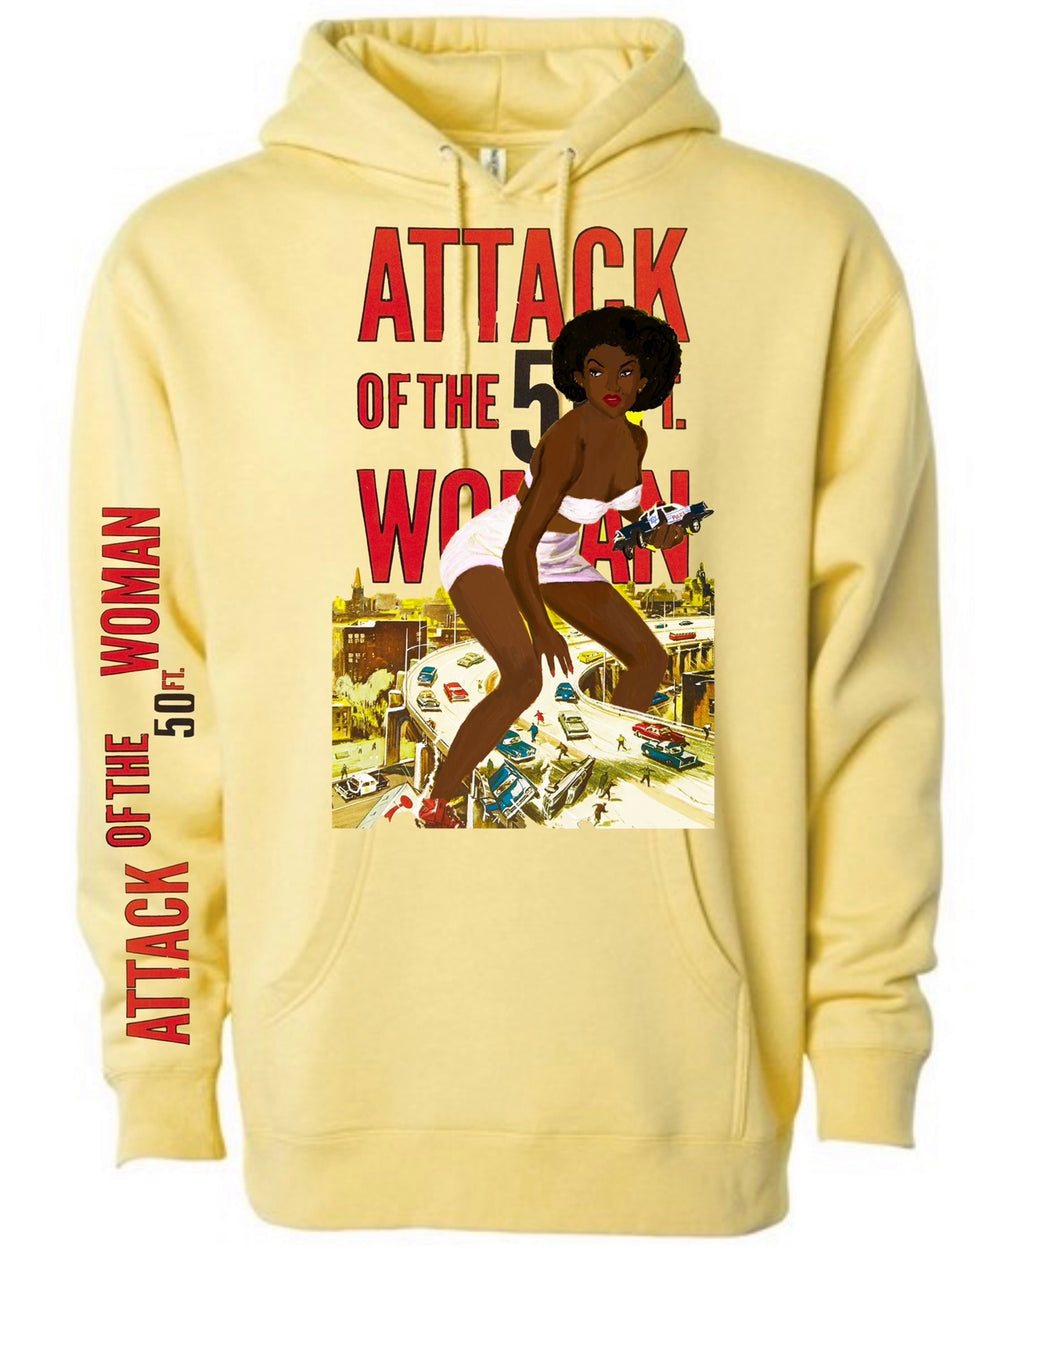 ATTACK HOODIE